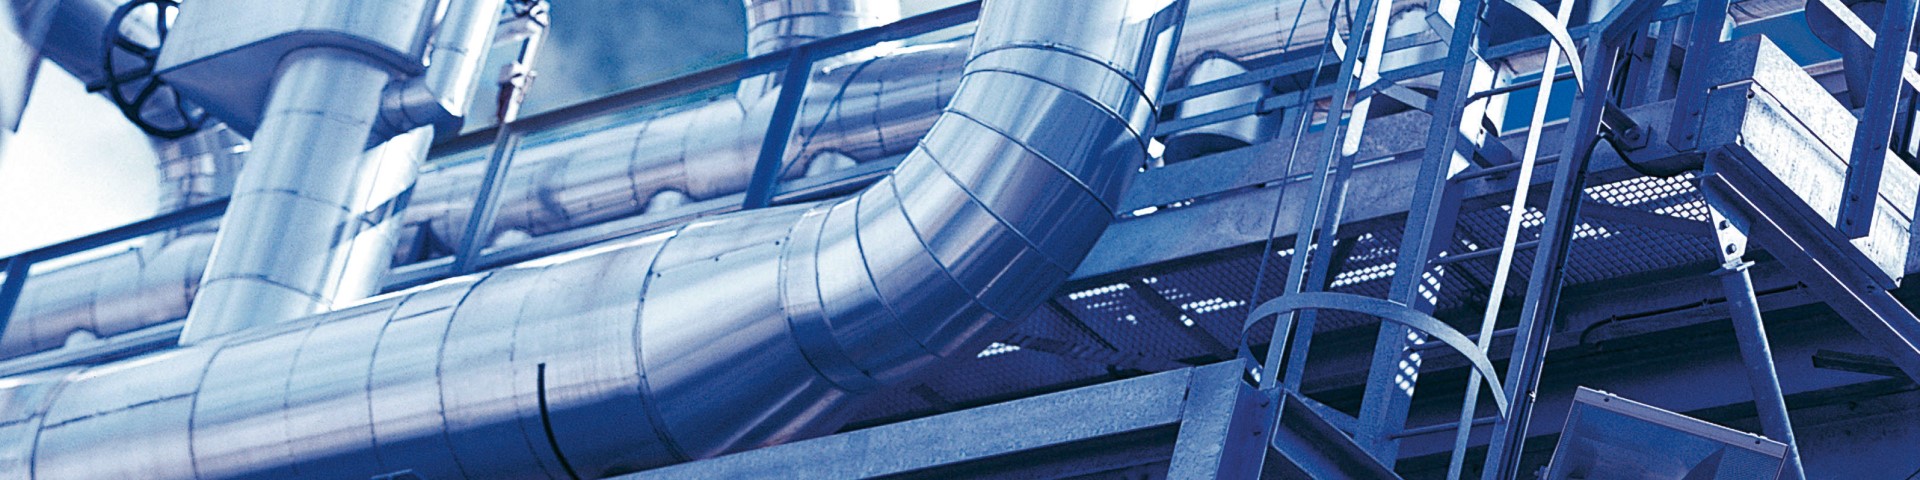 pipes in industrial environment 